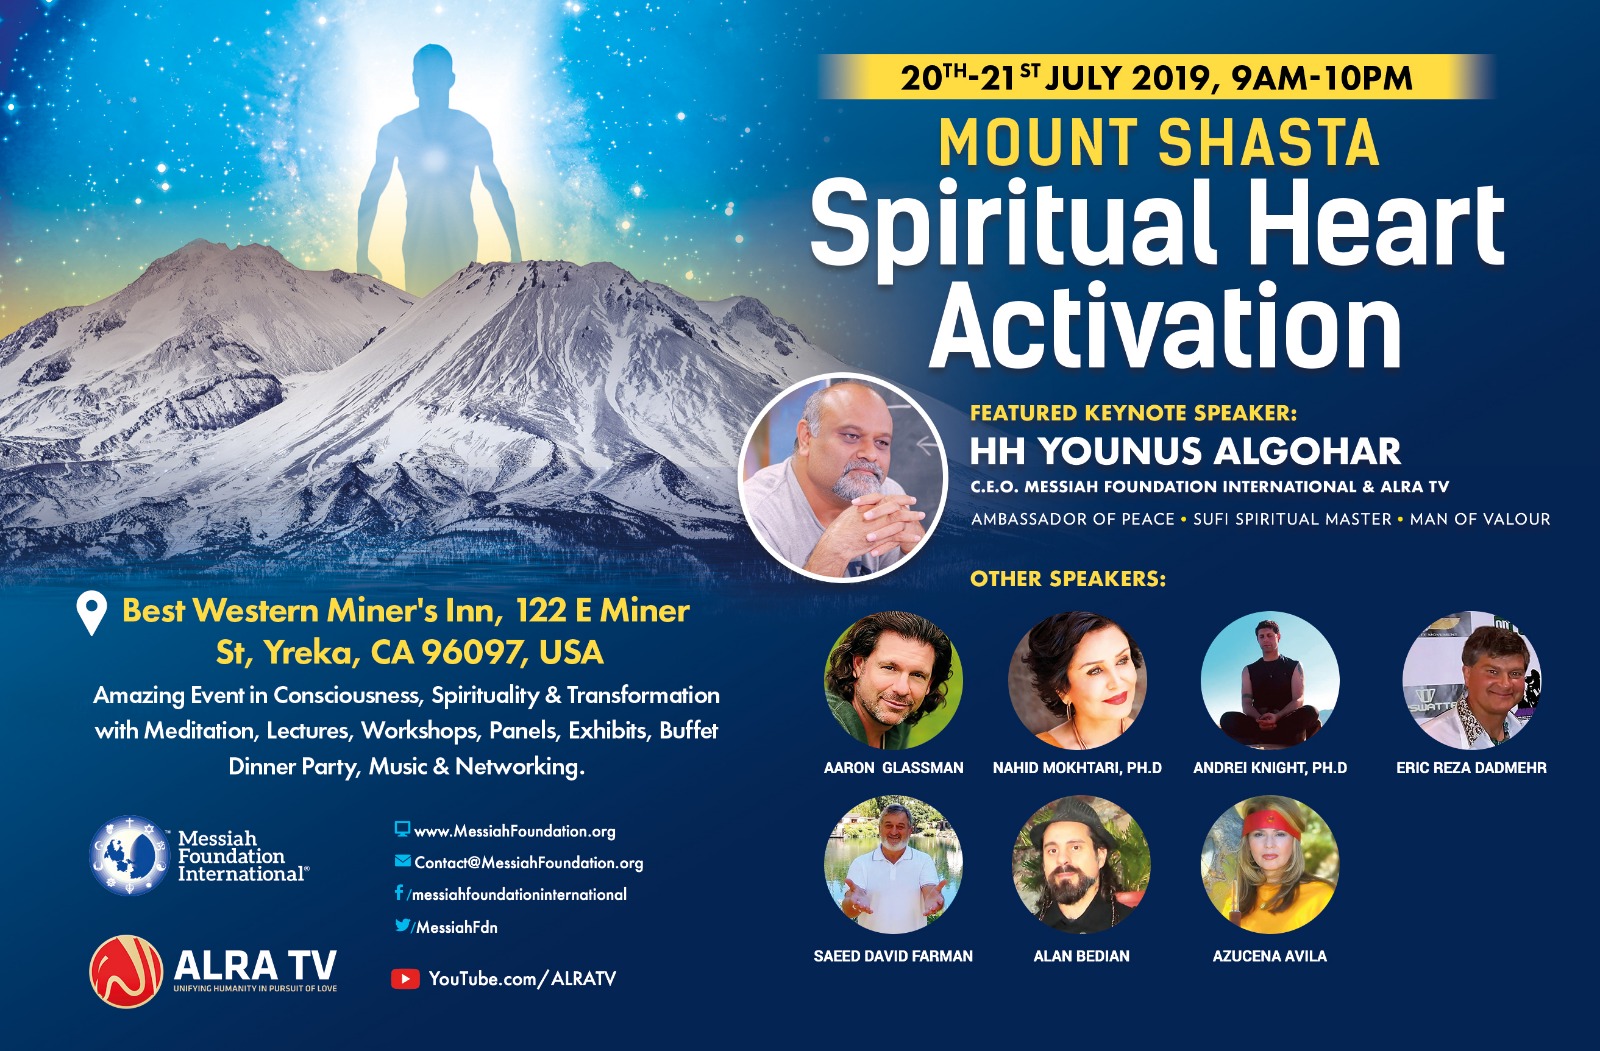 20-21 July: Mount Shasta Spiritual Heart Activation Event – The Awaited One